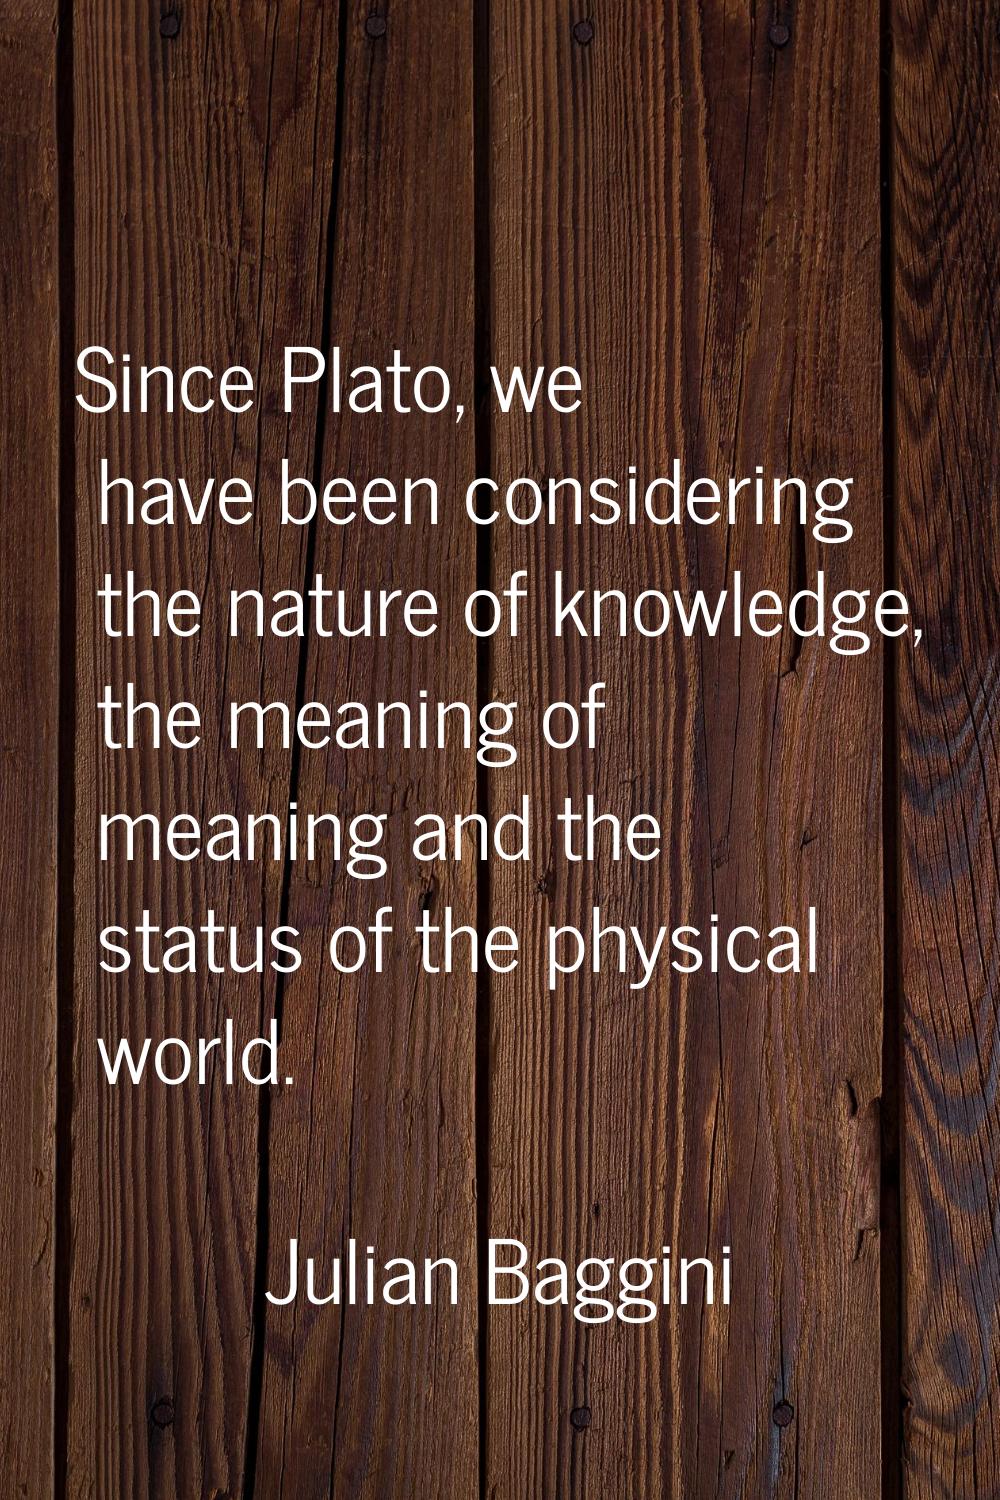 Since Plato, we have been considering the nature of knowledge, the meaning of meaning and the statu